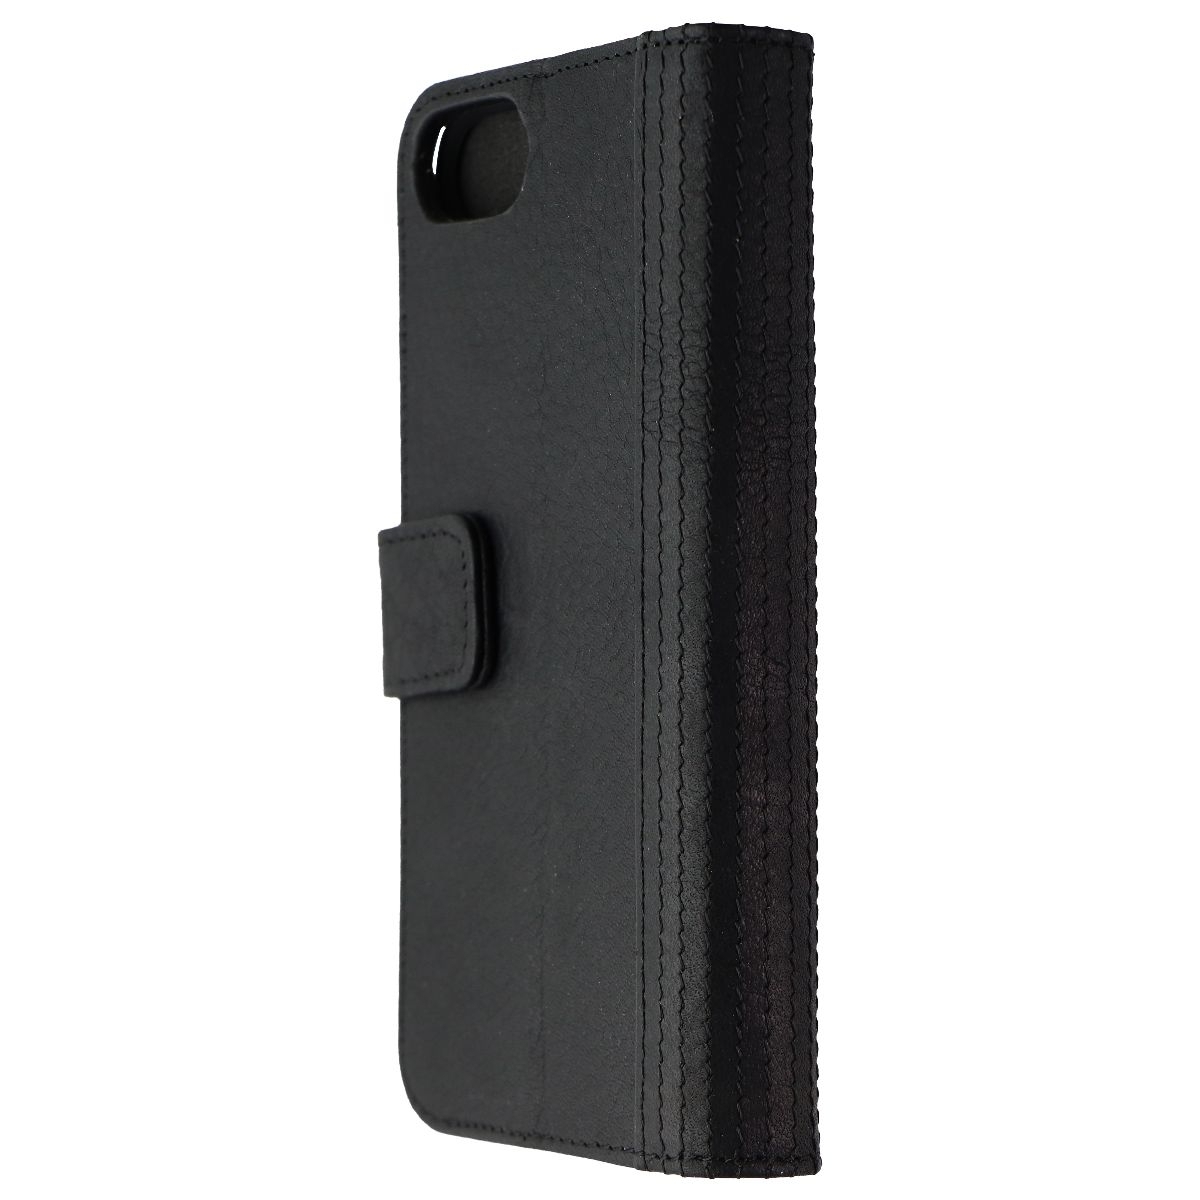 DECODED Full Grain Leather 2-in-1 Wallet For IPhone 8/7/6s/6 - Rough Black (Refurbished)